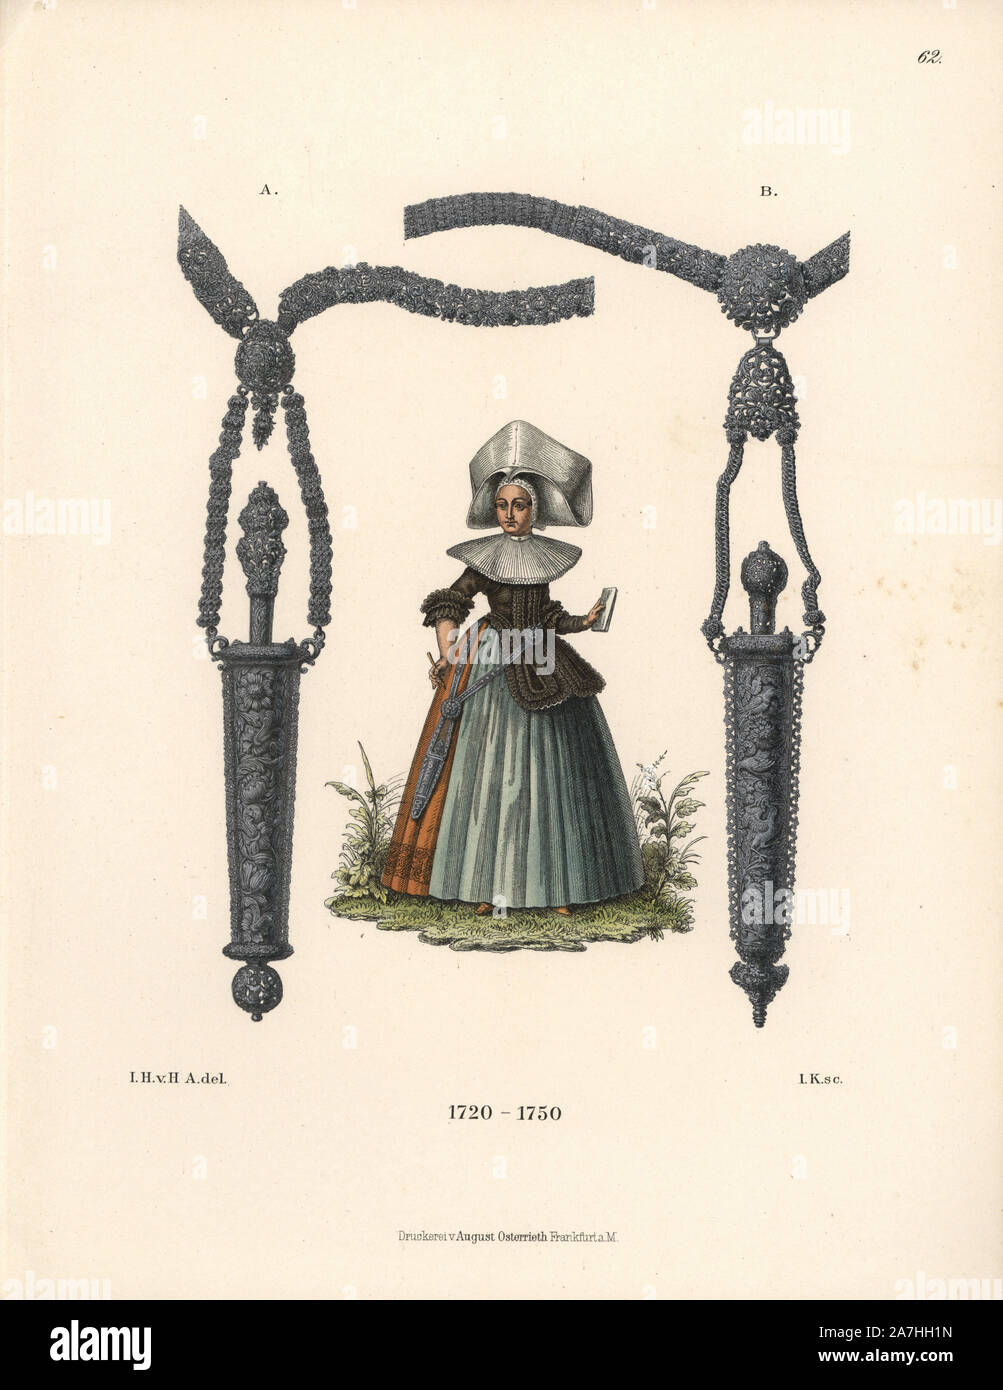 Woman from Augsburg in mid 18th century fashion wearing a silver cutlery case from her waist, and a high hat with large lace ruff, and details of silver knife cases. Chromolithograph from Hefner-Alteneck's 'Costumes, Artworks and Appliances from the Middle Ages to the 18th Century,' Frankfurt, 1889. Illustration by Dr. Jakob Heinrich von Hefner-Alteneck, lithographed by Joh. Klipphahn, and published by Heinrich Keller. Dr. Hefner-Alteneck (1811 - 1903) was a German museum curator, archaeologist, art historian, illustrator and etcher. Stock Photo